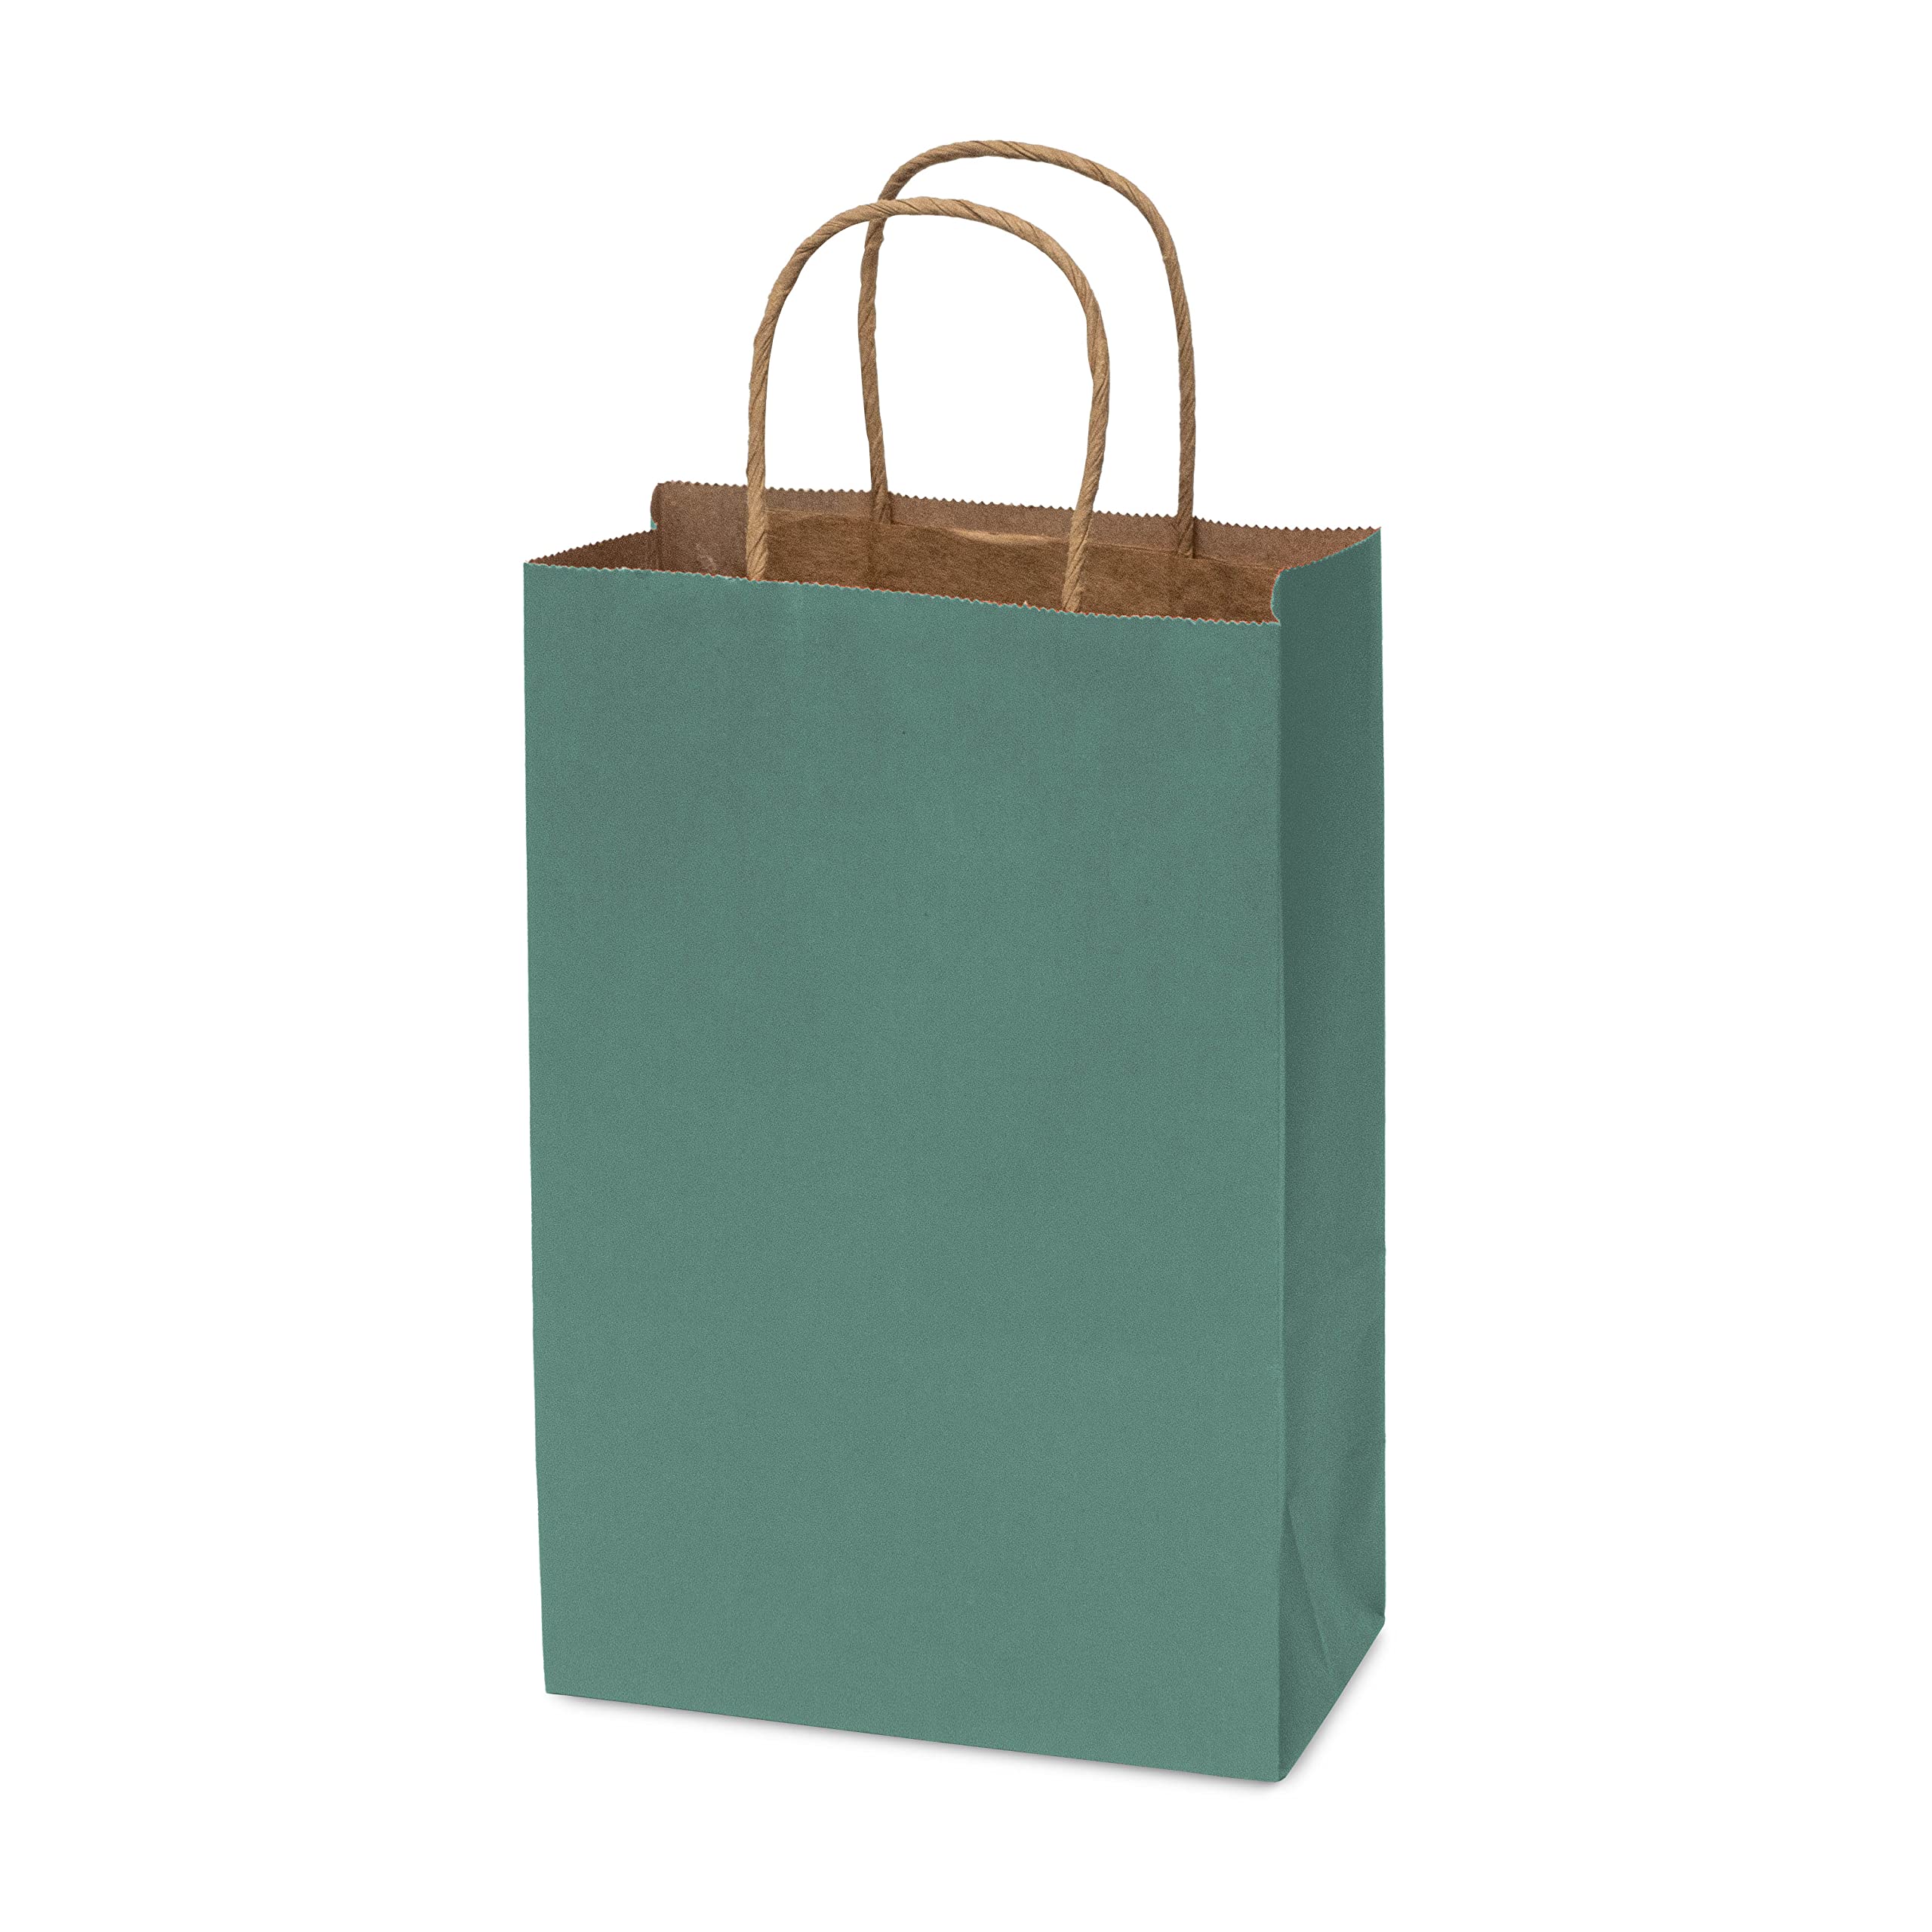 Green Gift Bags - 6x3x9 Inch 100 Pack Small Kraft Paper Shopping Bags with Handles, Craft Totes in Bulk for Boutiques, Small Business, Retail Stores, Birthday Parties, Jewelry, Merchandise, Bulk  - Acceptable